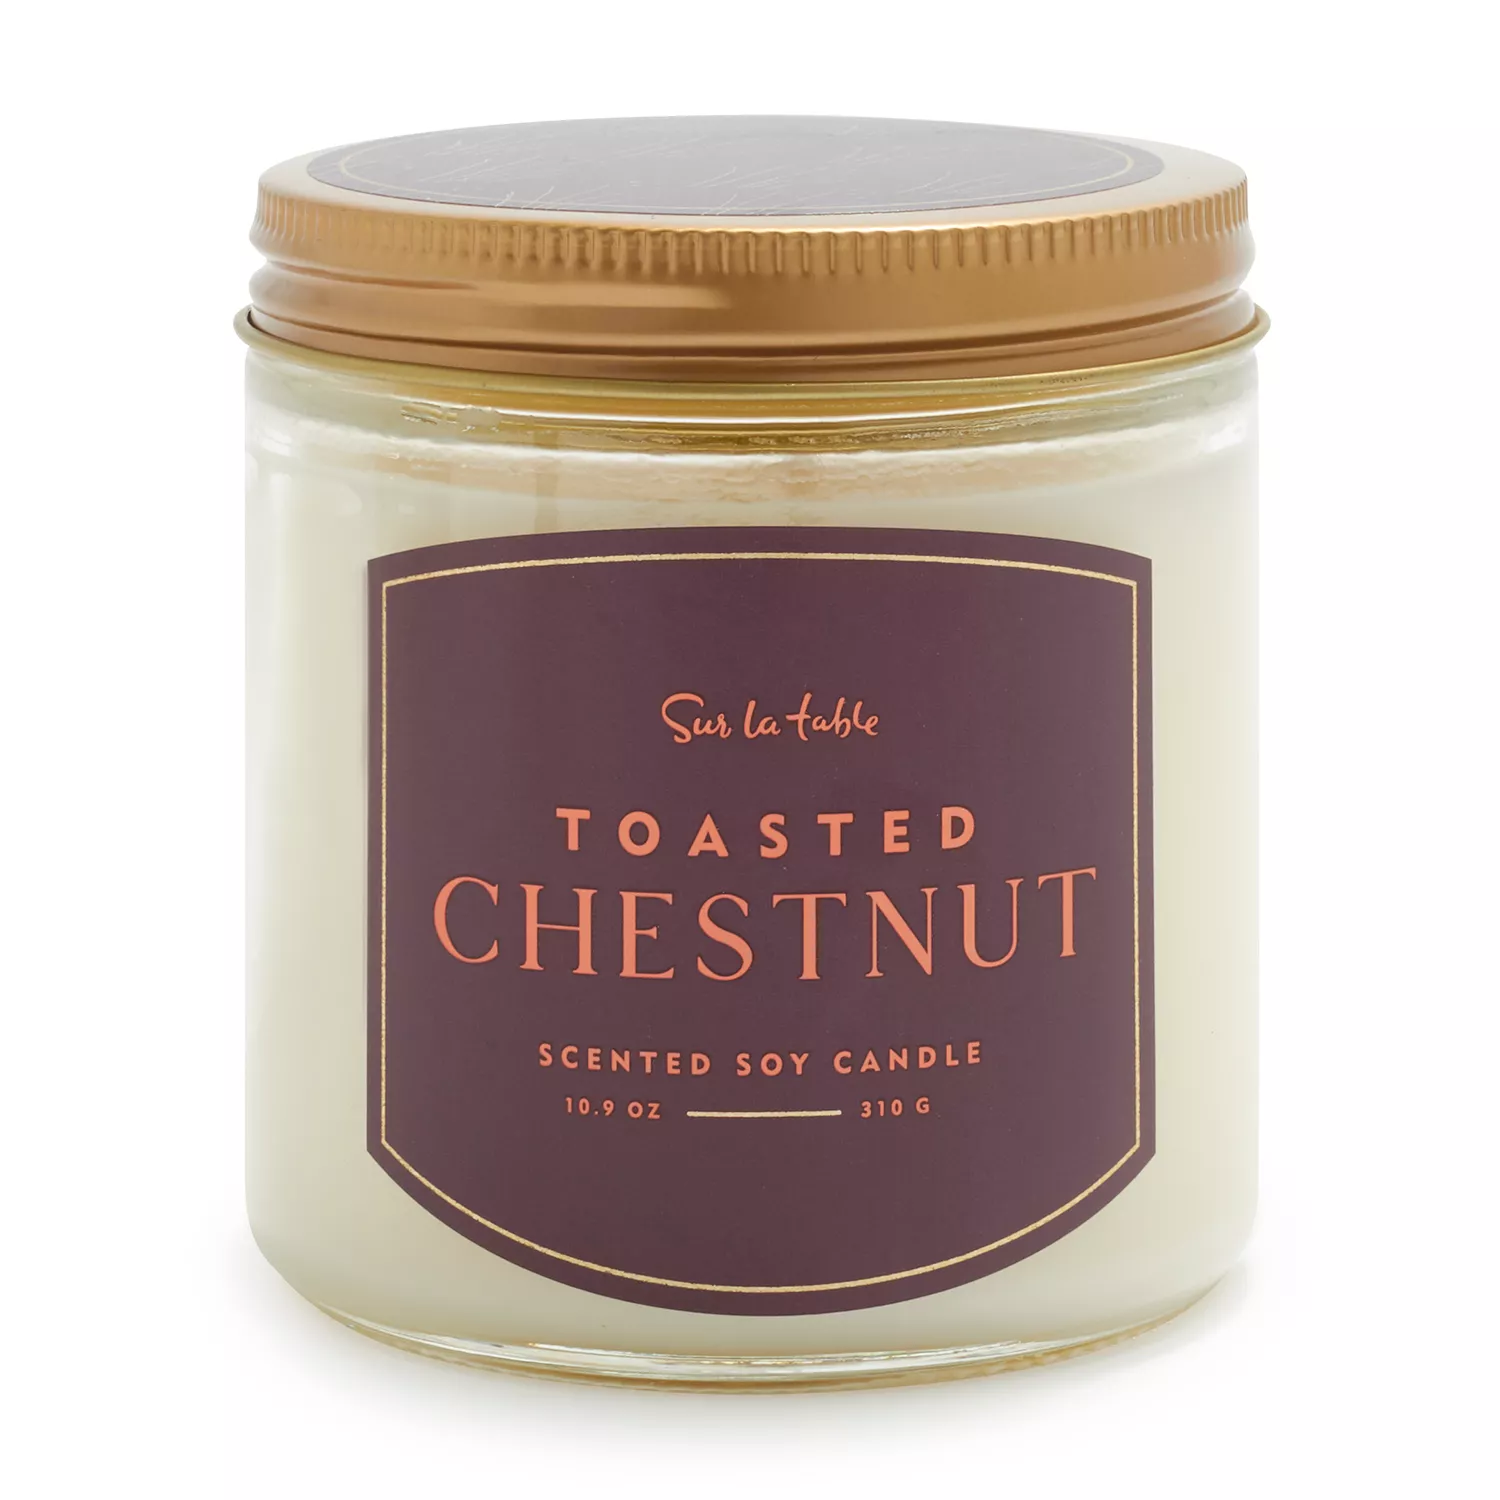 Sur La Table Toasted Chestnut Scented Candle, 10.9 oz.